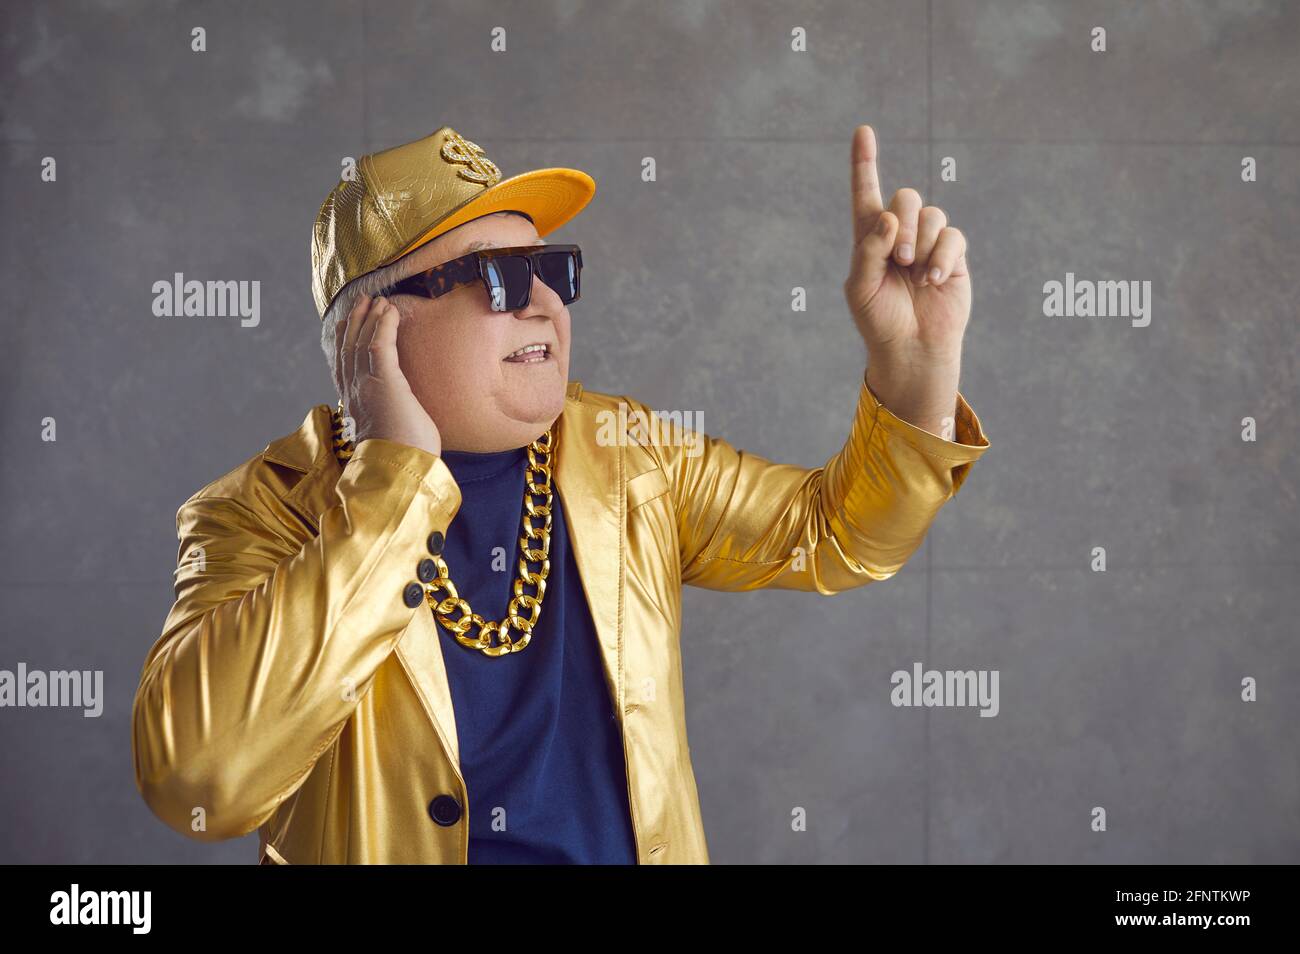 Funny senior DJ in golden jacket, baseball cap and chain necklace mixing music at disco party Stock Photo